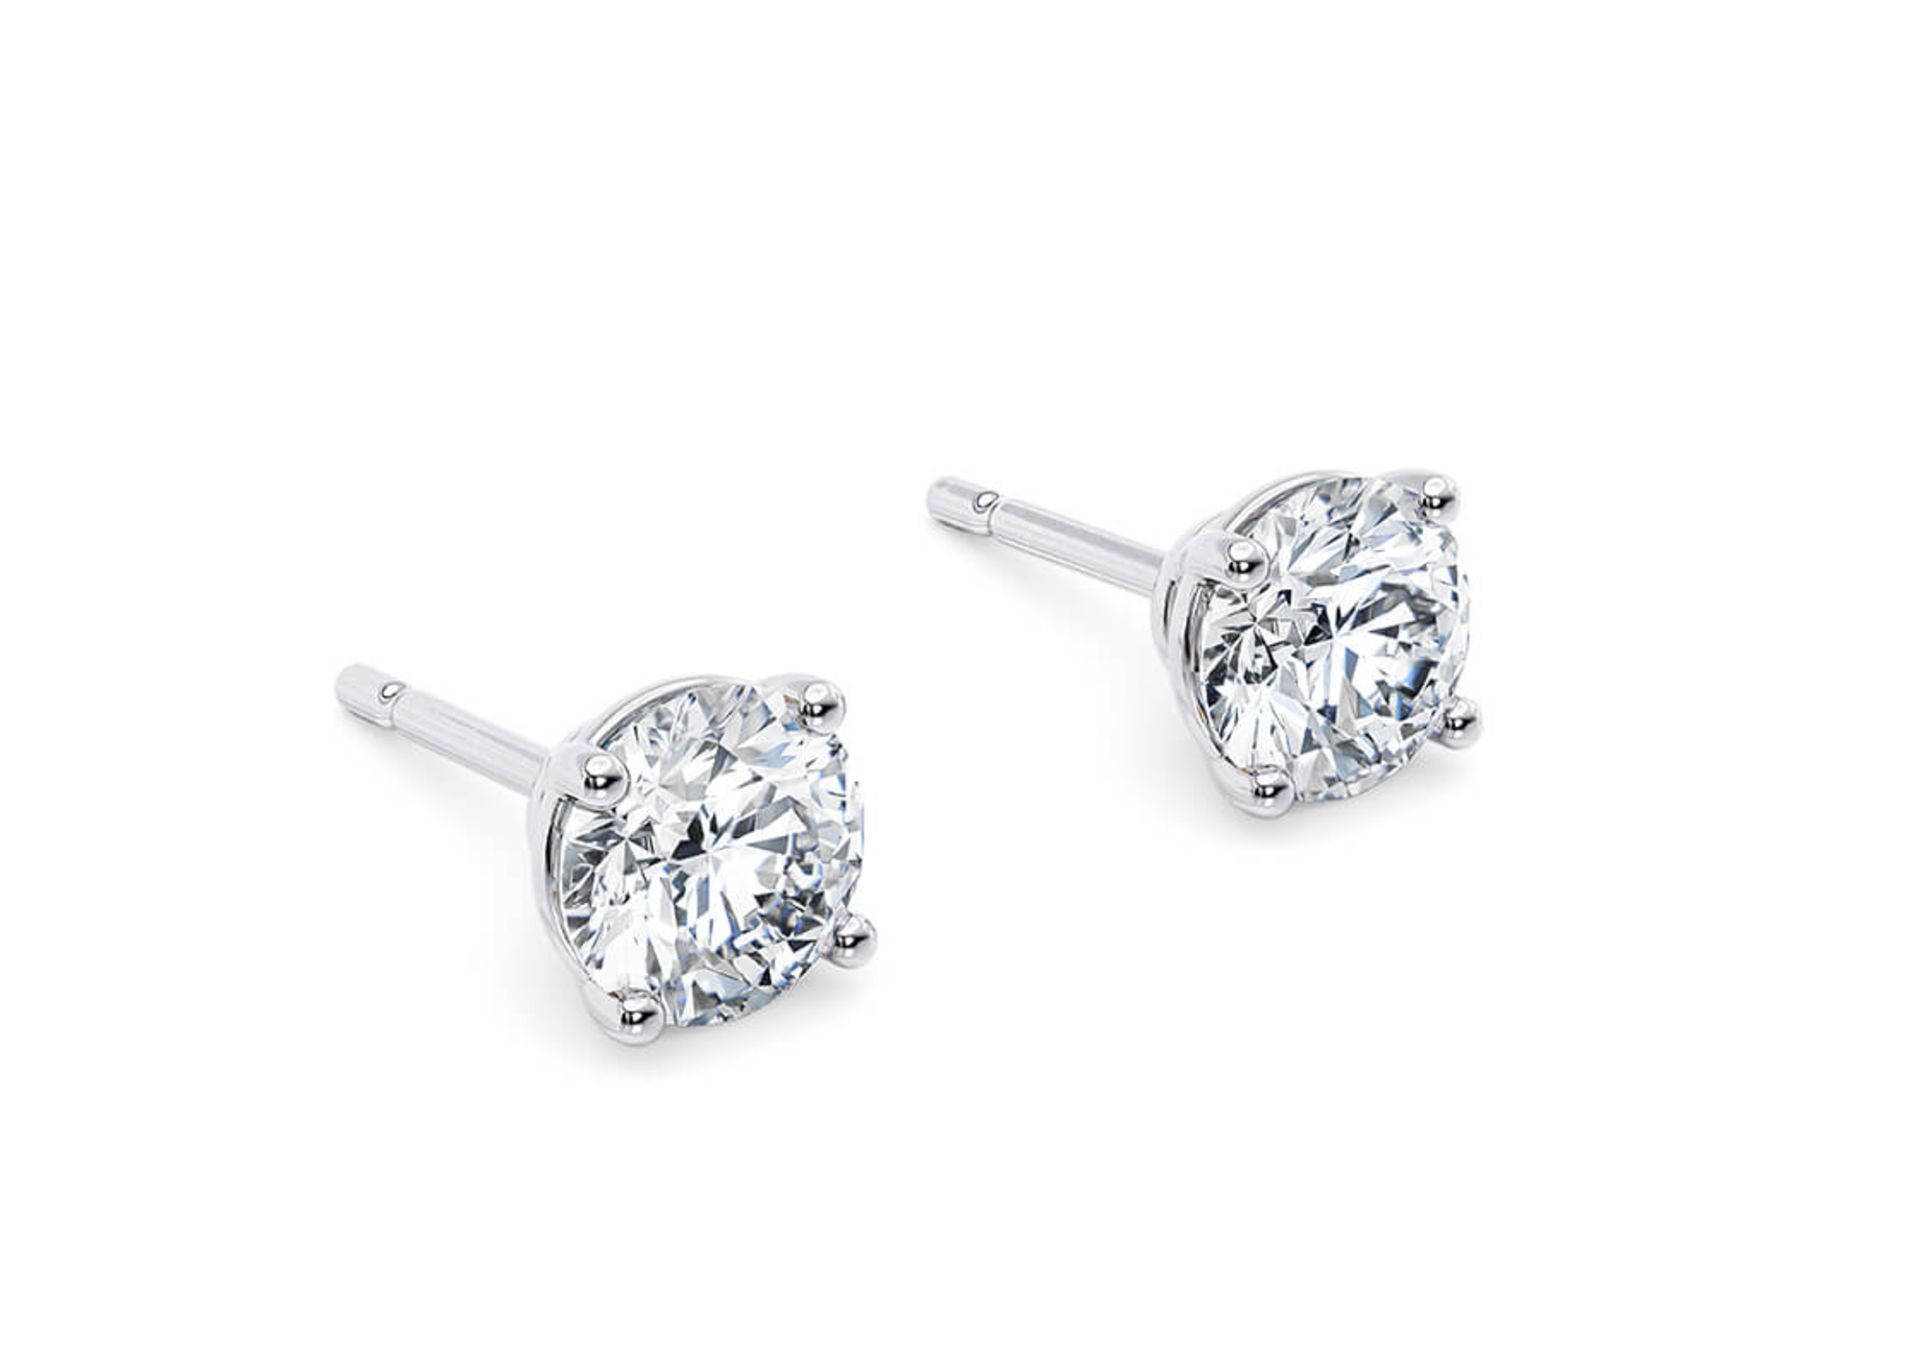 Round Brilliant Cut 4.00 Carat Diamond Earrings Set in 18kt White Gold - D Colour VS Clarity - GIA - Image 2 of 3